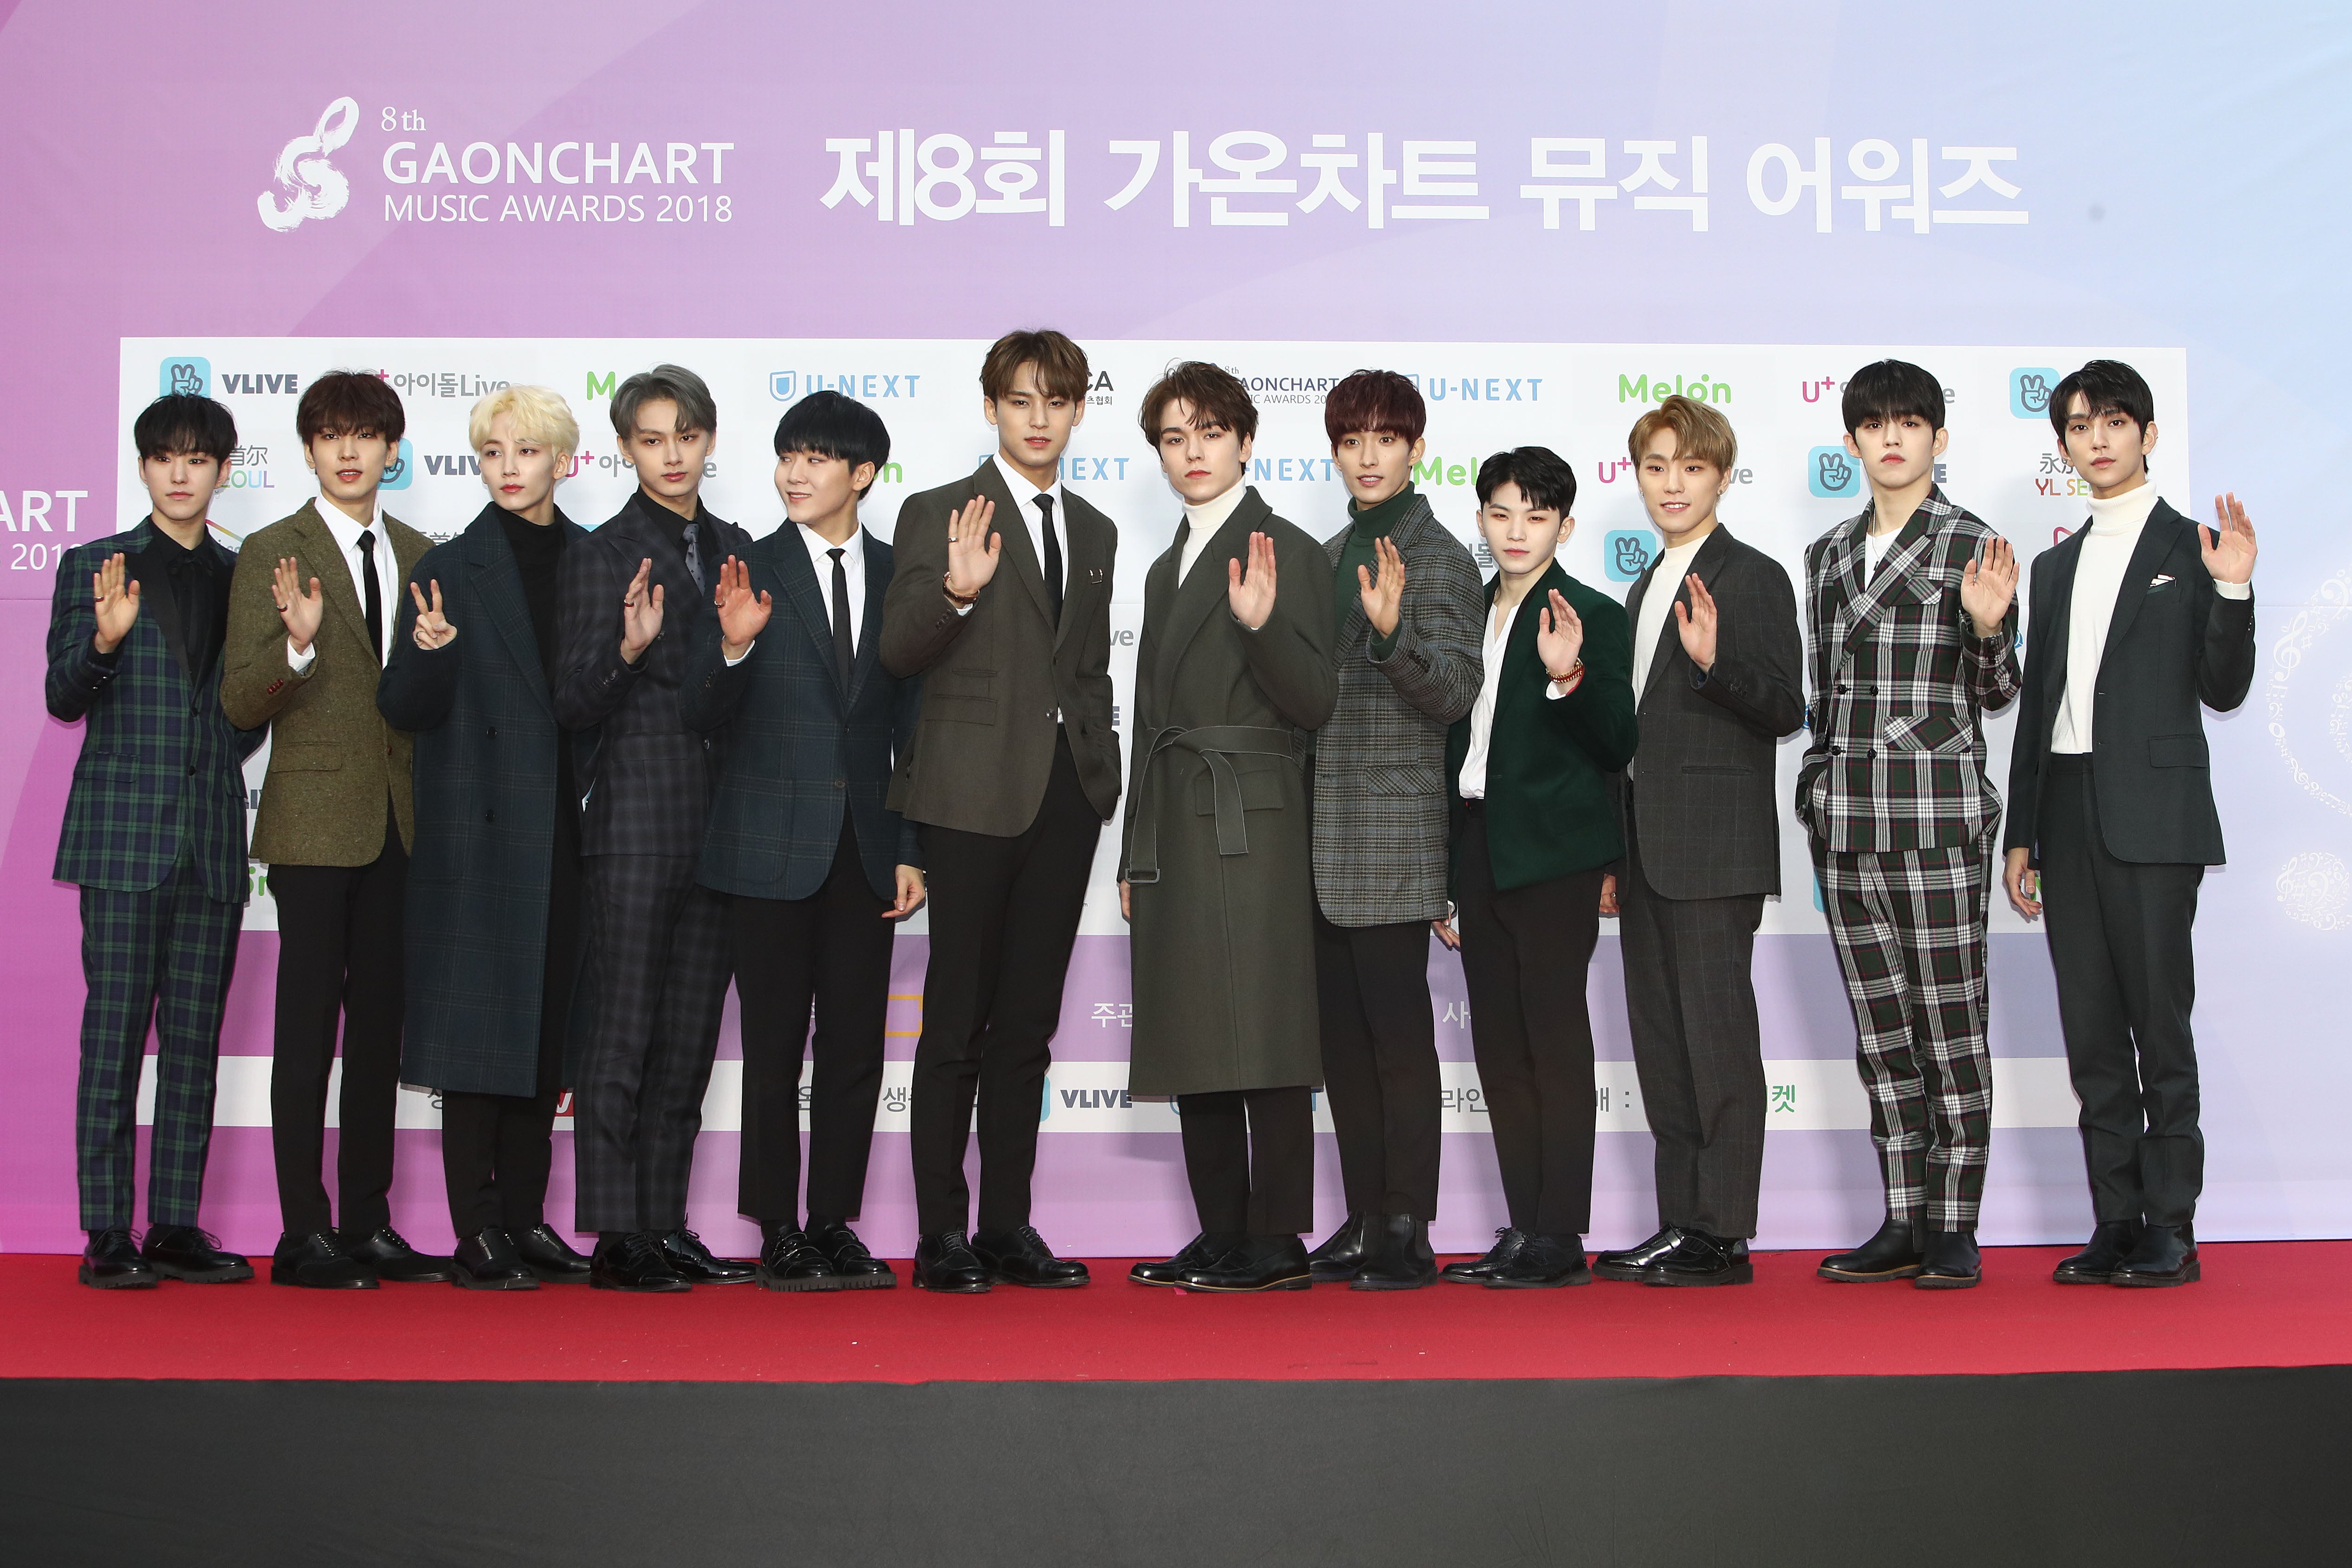 South Korean boy band SEVENTEEN attends the 8th Gaon Chart K-Pop Awards on 23 January, 2019 in Seoul, South Korea